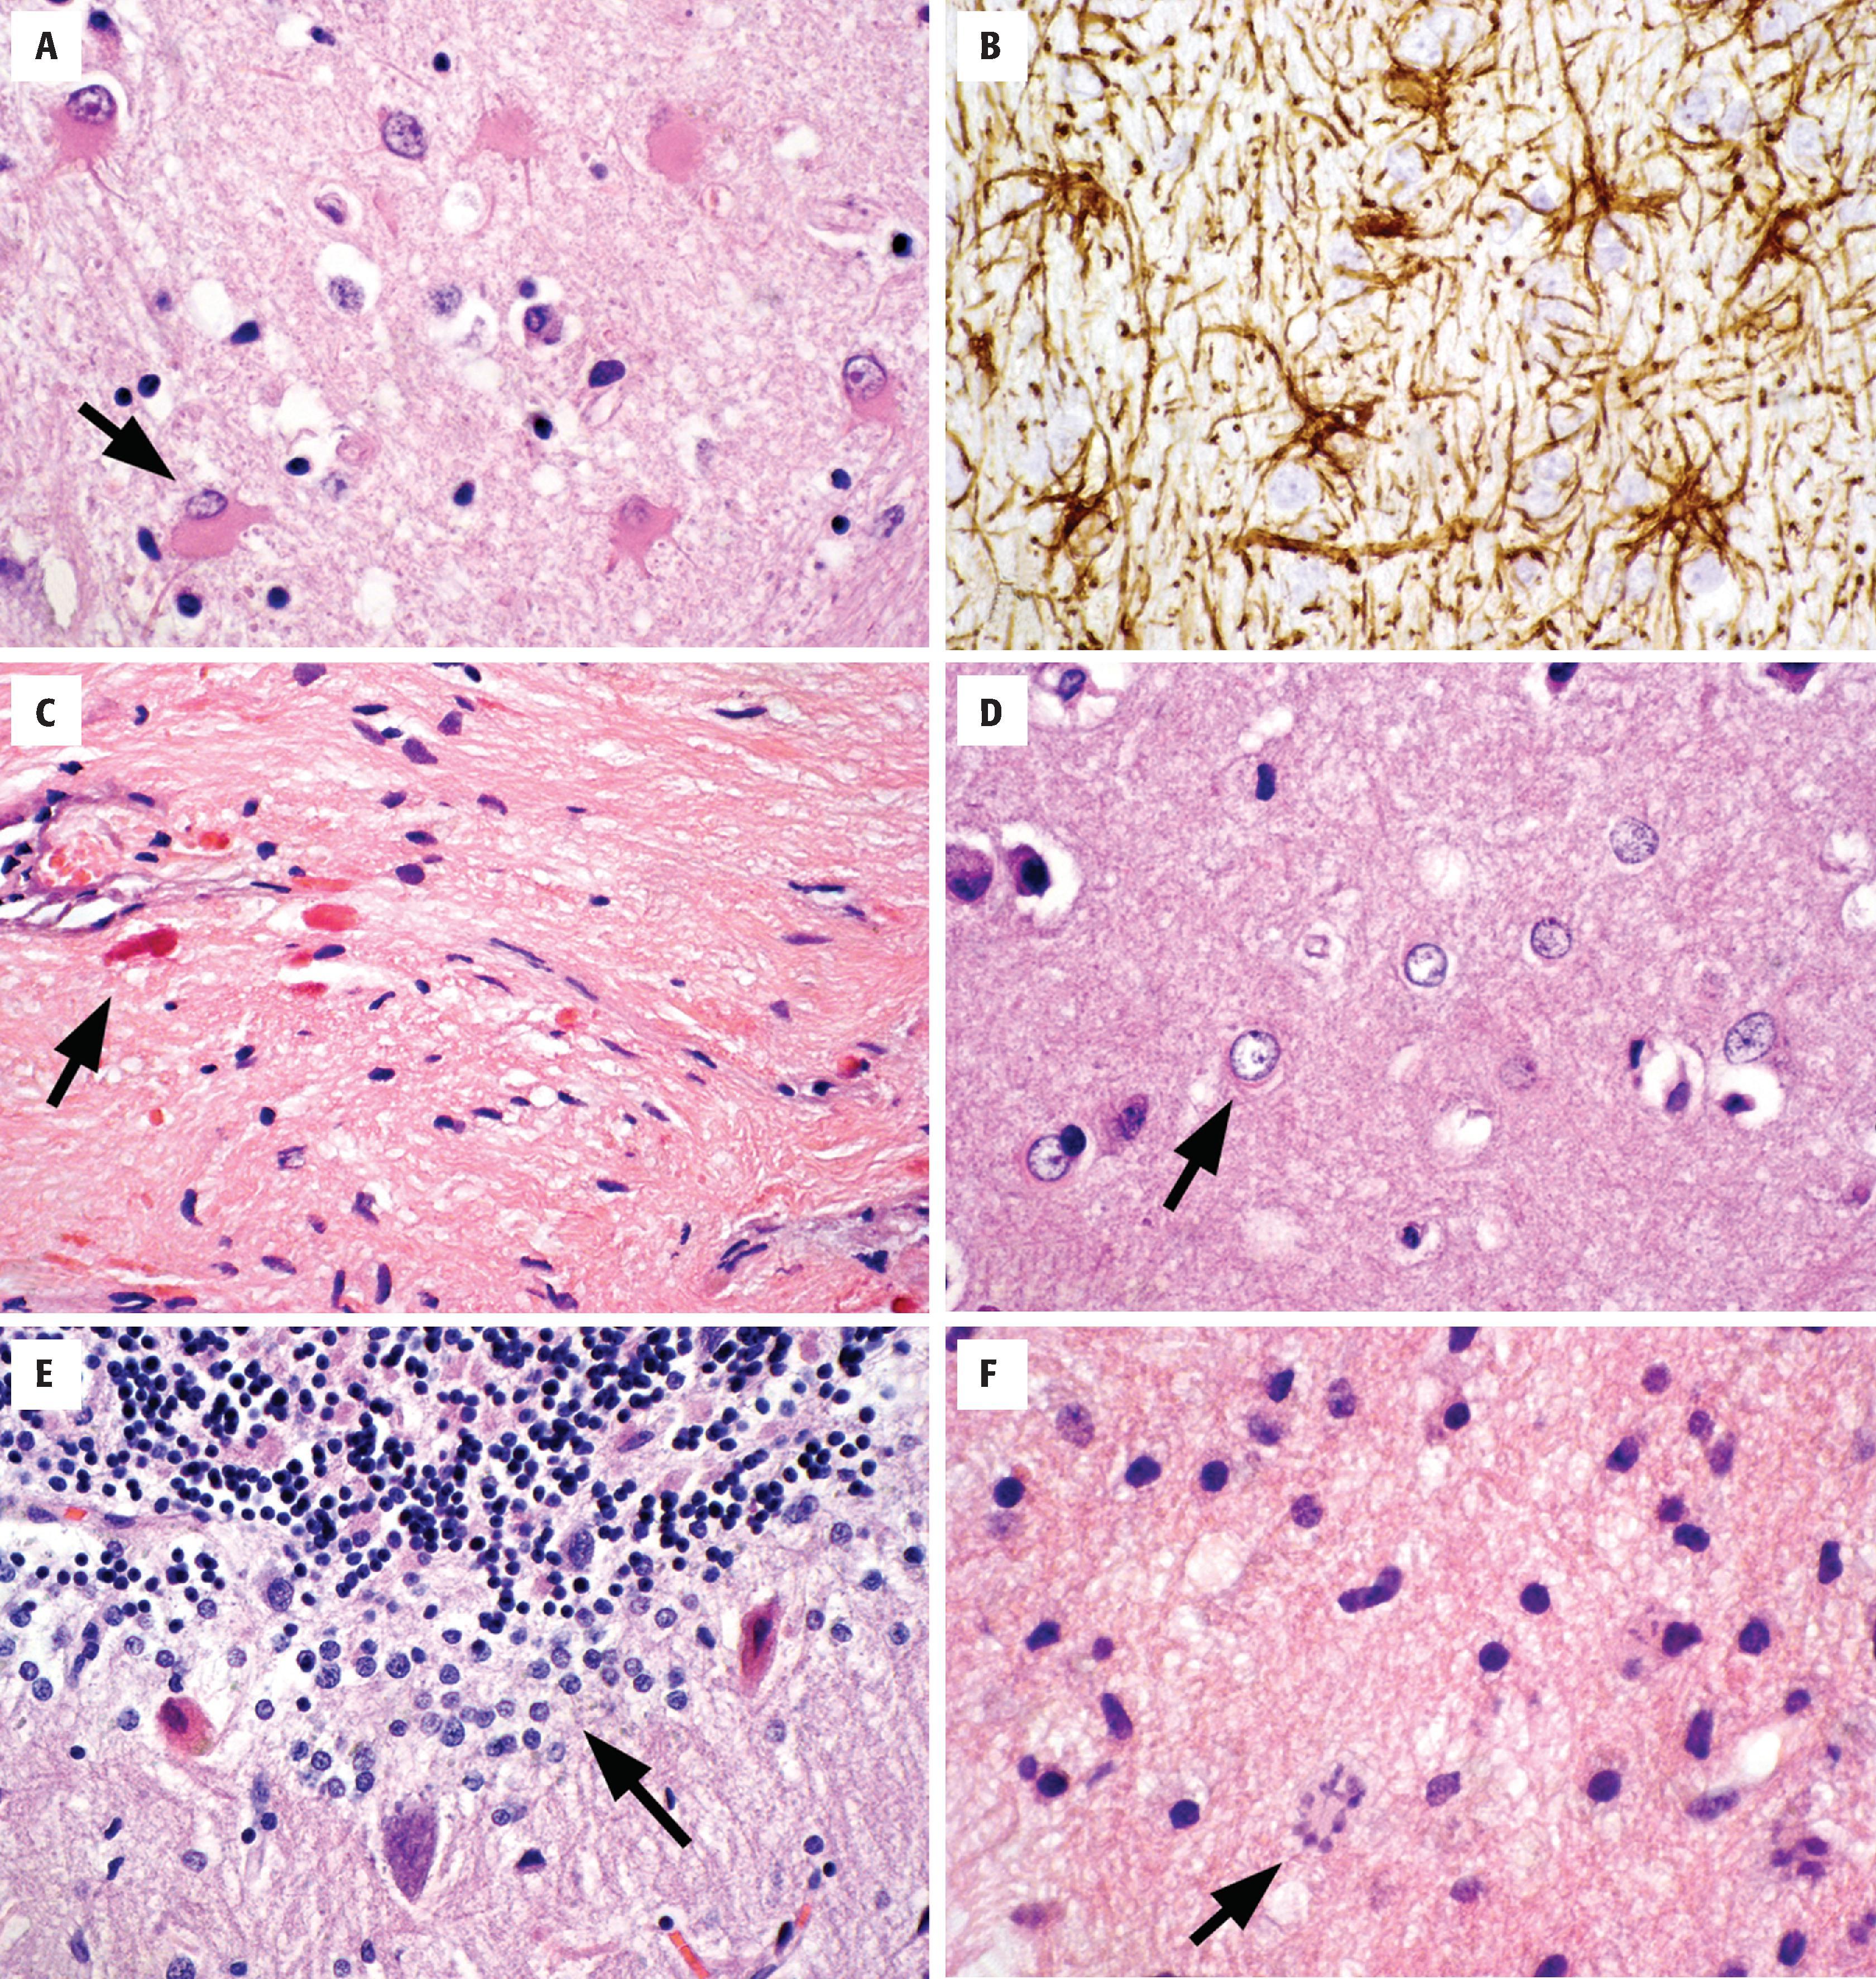 FIGure 1.11, Reactive glia. A , Gemistocytic astrocytes ( arrow ) are one form of reactive change in which the astrocytic cytoplasm is distended and eosinophilic and its processes are readily identified. B , Immunohistochemistry for GFAP highlights reactive astrocytes and emphasizes their star-like quality. C , Piloid gliosis is a highly fibrillar form of reactive gliosis that is composed of dense, elongate astrocytic processes that are tightly packed together. Rosenthal fibers ( arrow ) can often be seen in piloid gliosis. D , Alzheimer type II astrocytes ( arrow ) have enlarged, clear nuclei and are seen in states of hyperammonemia. E , Bergmann gliosis ( arrow ) occurs at the interface of the molecular and granular layers of the cerebellum, generally in response to Purkinje cell injury. F , Creutzfeldt cells (granular mitoses; arrow ) are reactive cells with fragmented nuclear material that can be mistaken for mitotic figures.